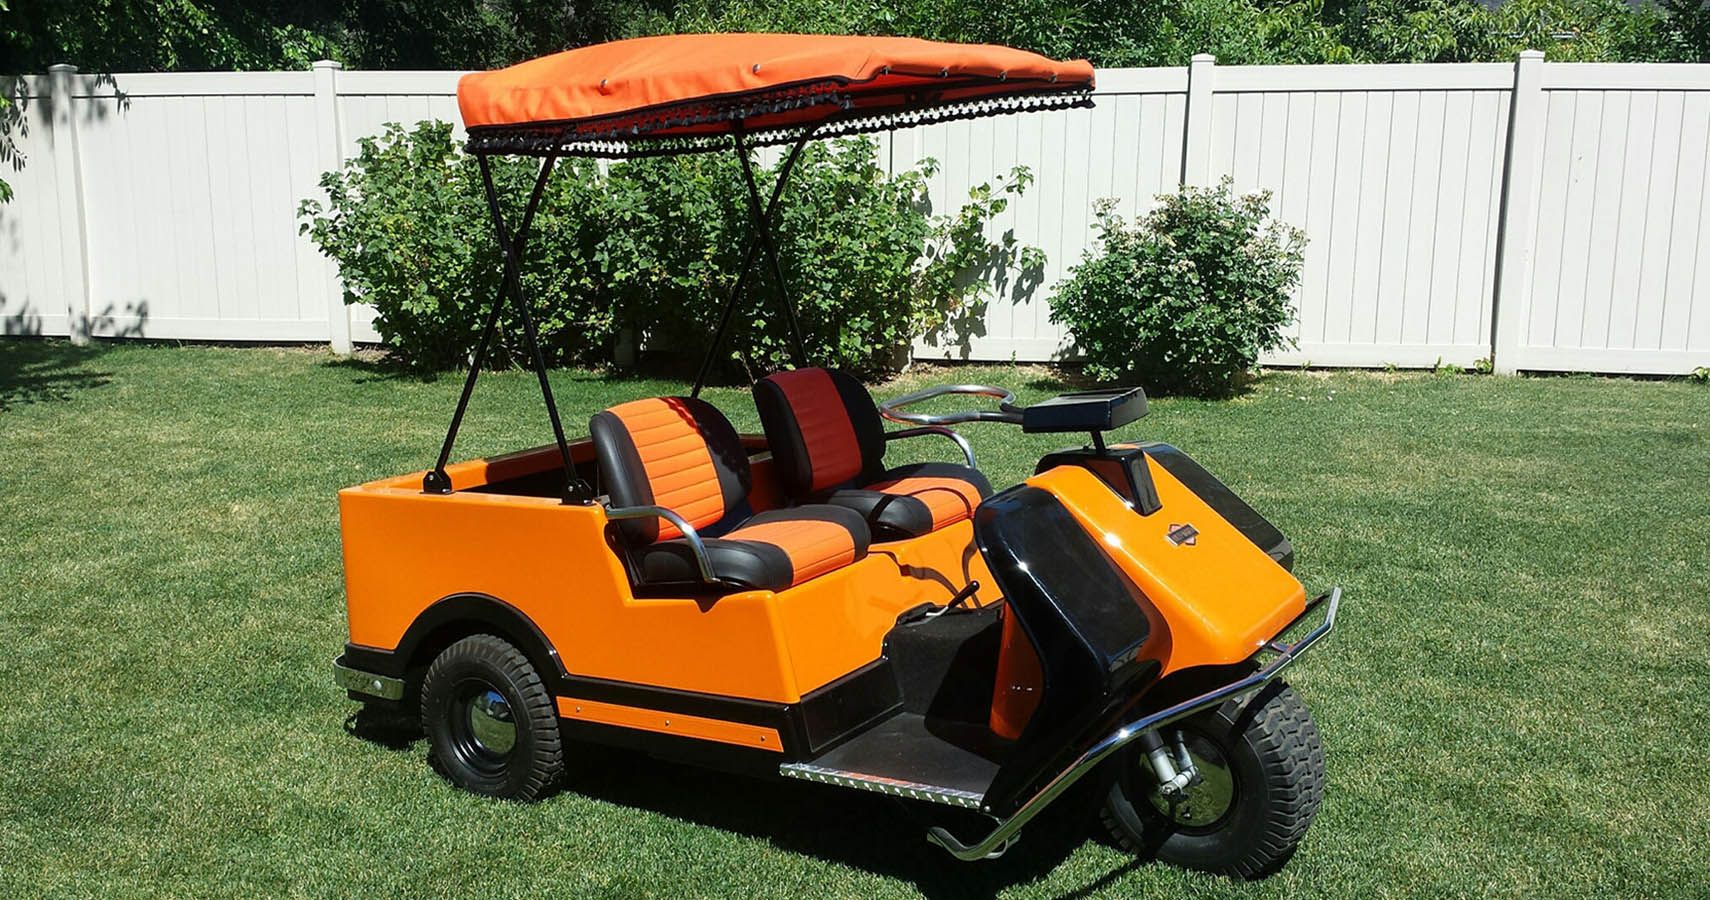 In 1963, William “Willie G” Davidson Joined The Company And Harley-Davidson Got Into The Business Of Making Golf Carts